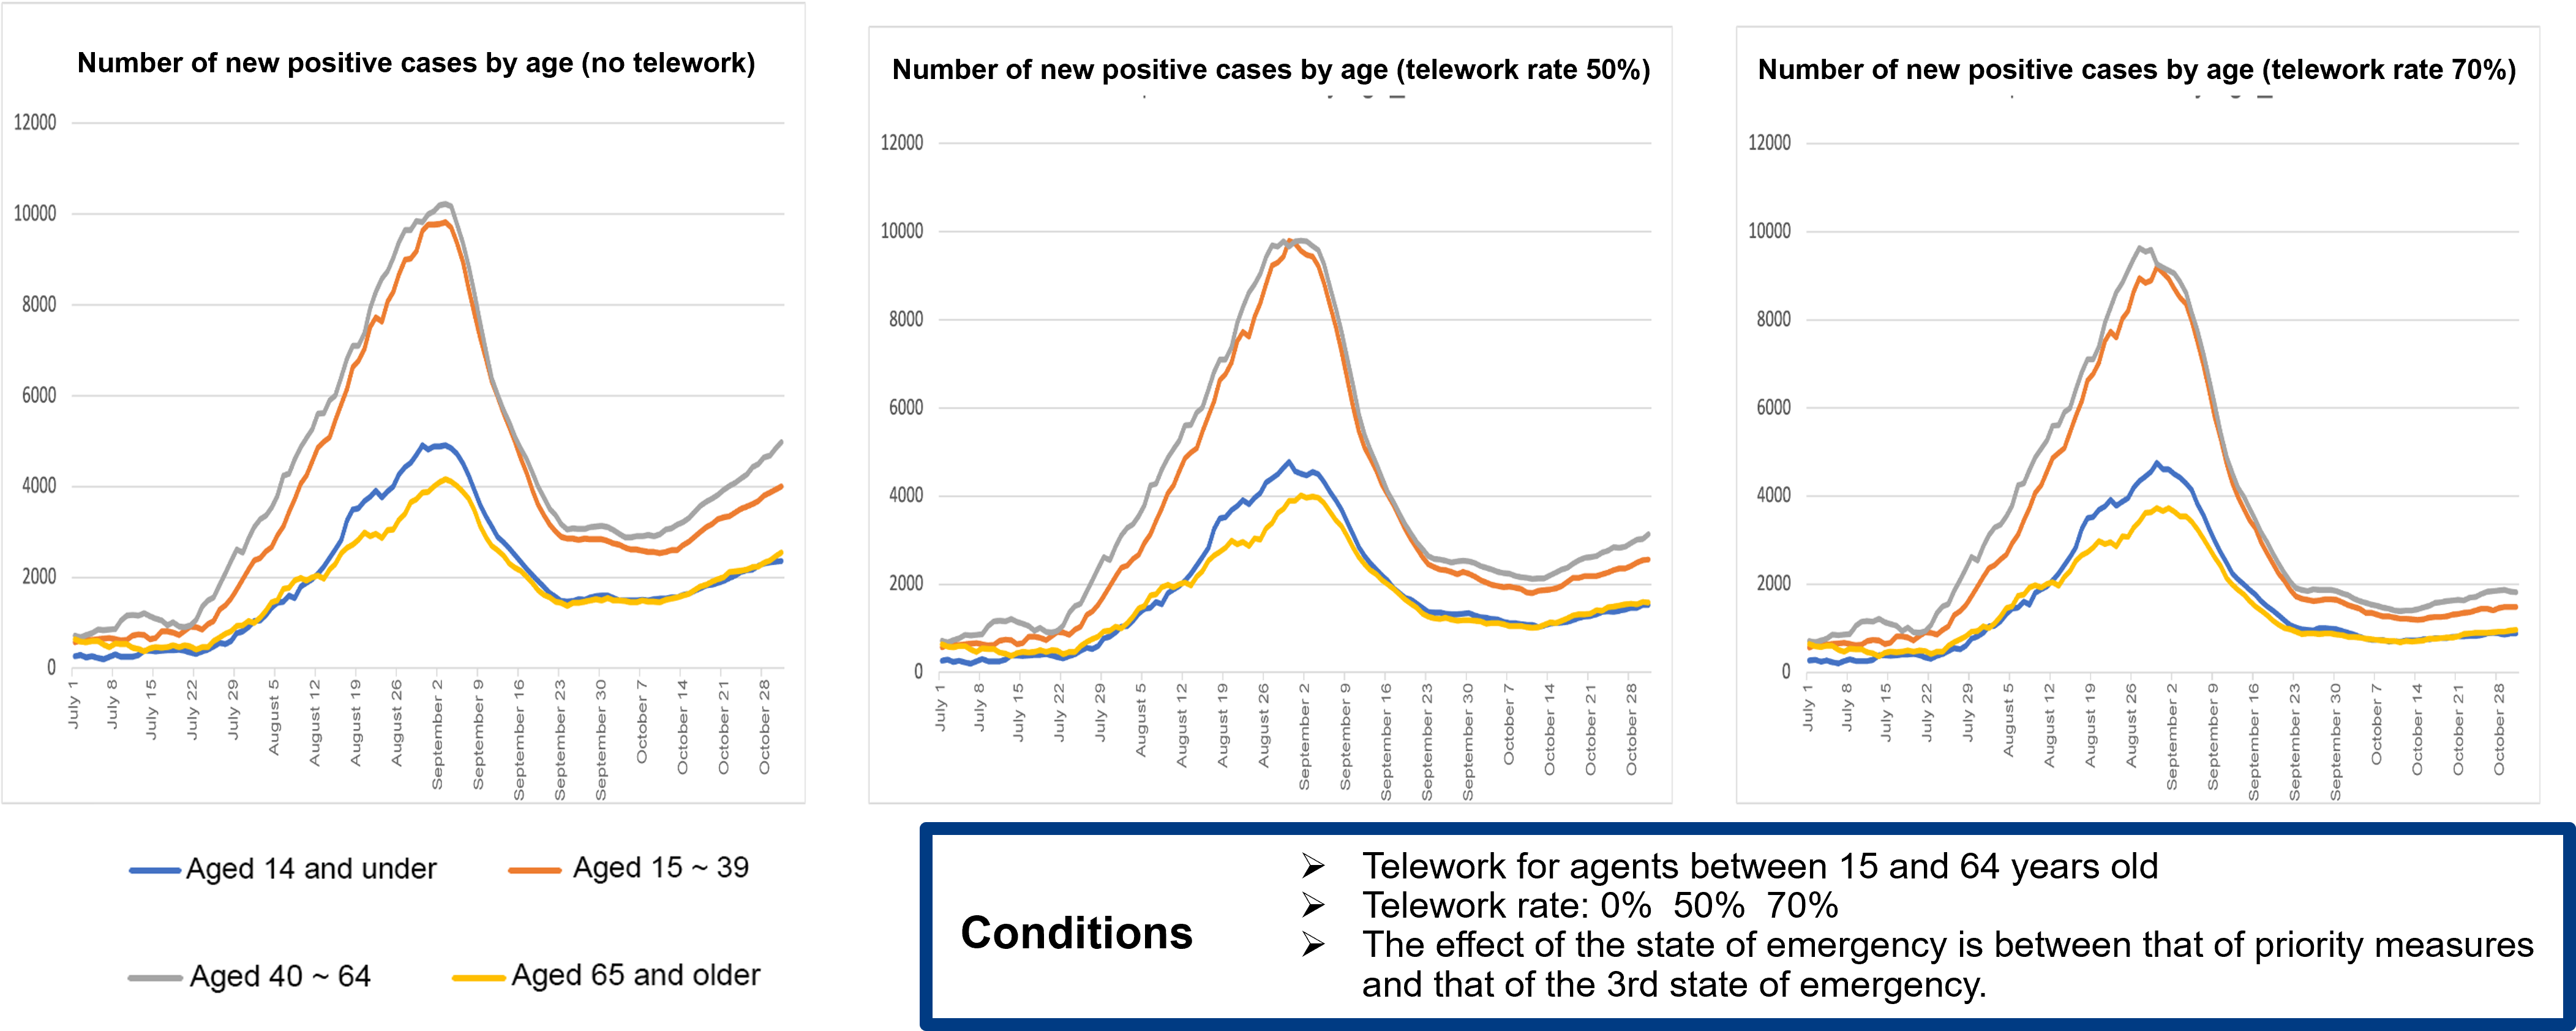 Number of new positive cases by age nationwide